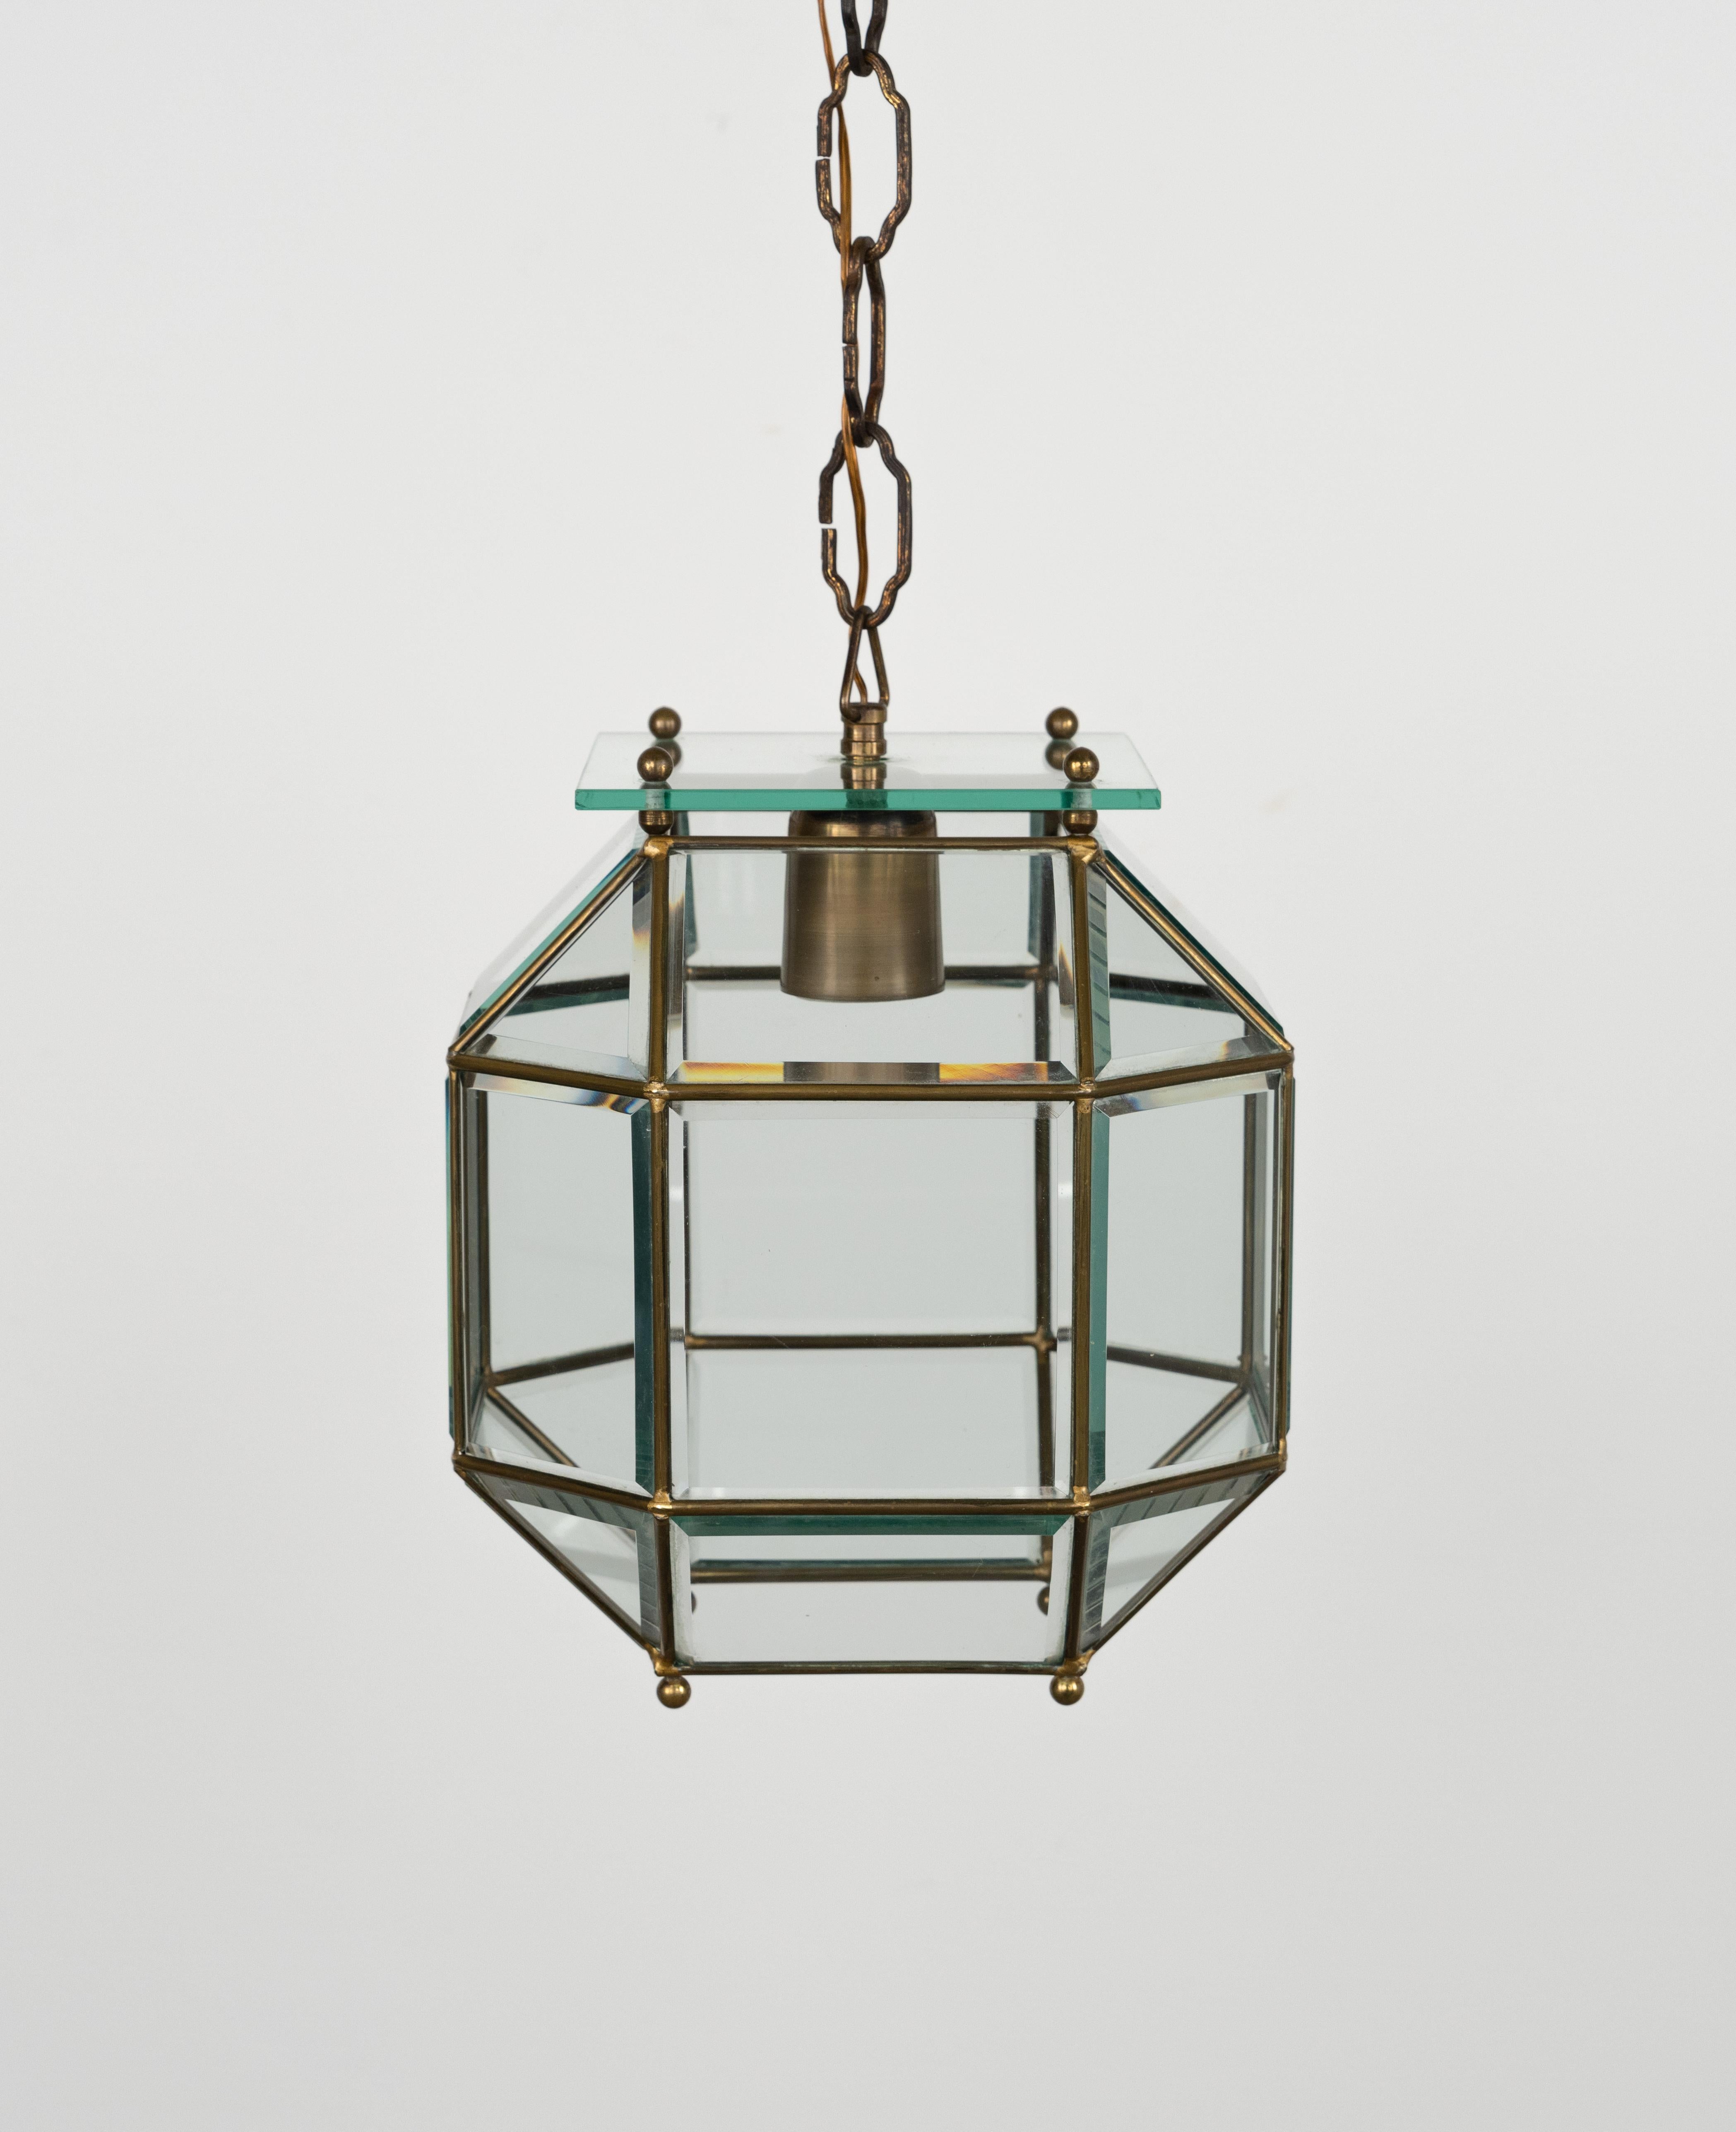 Midcentury Chandelier in Brass and Beveled Glass Adolf Loos Style, Italy 1950s For Sale 1